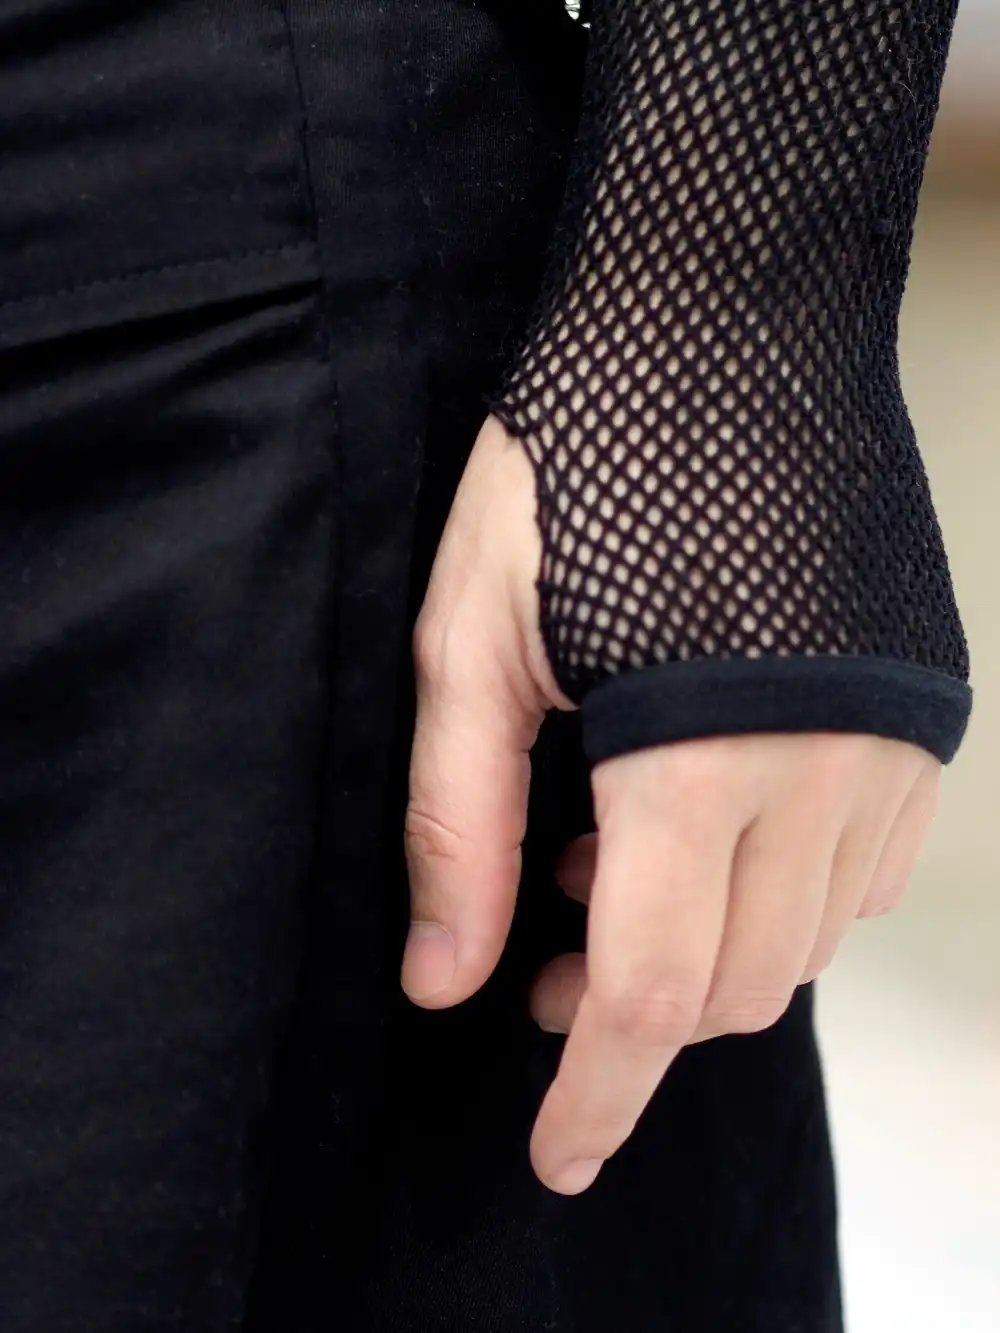 Fishnet sleeve worn by a woman